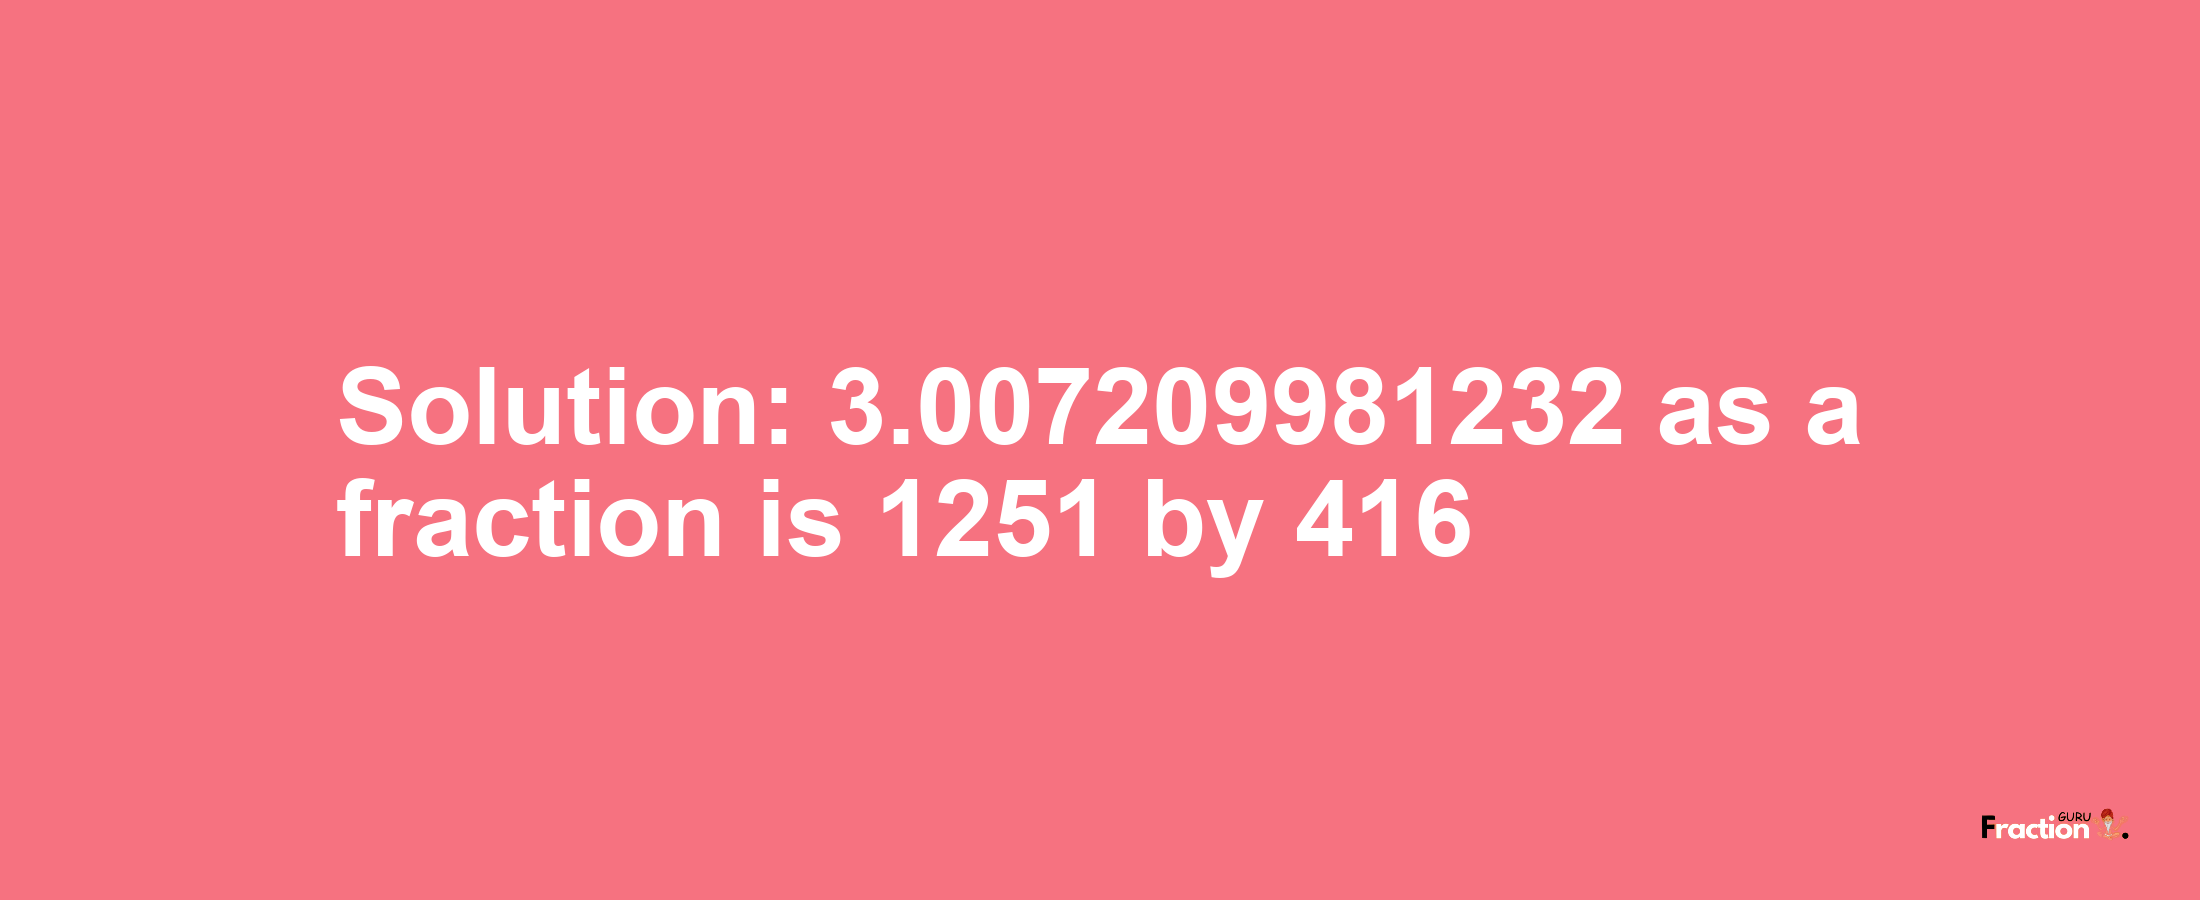 Solution:3.007209981232 as a fraction is 1251/416